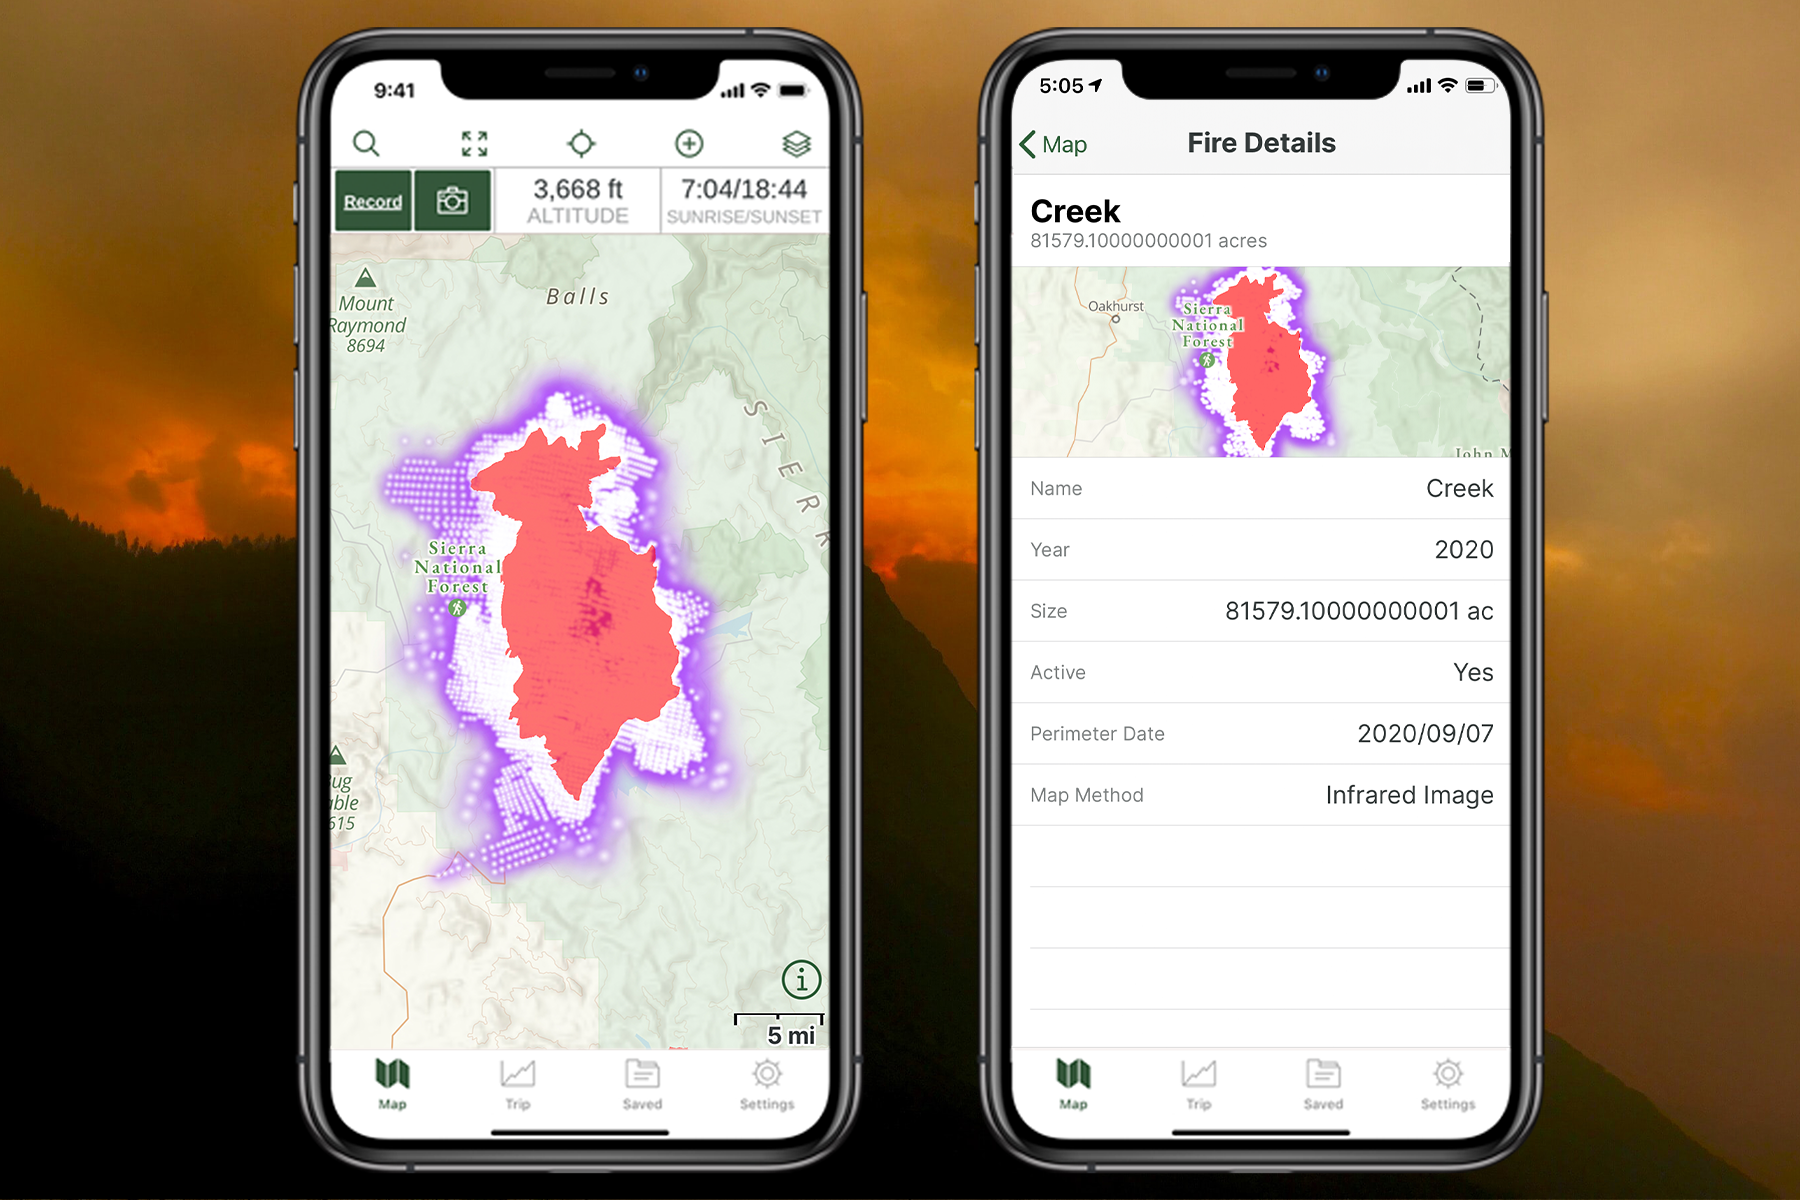 A screenshot of the Wildfires (Satellite Detections) and (Current) map layers in the Gaia GPS app shows where a wildfire is located, its name, the year, size, status, perimeter date, and map method.